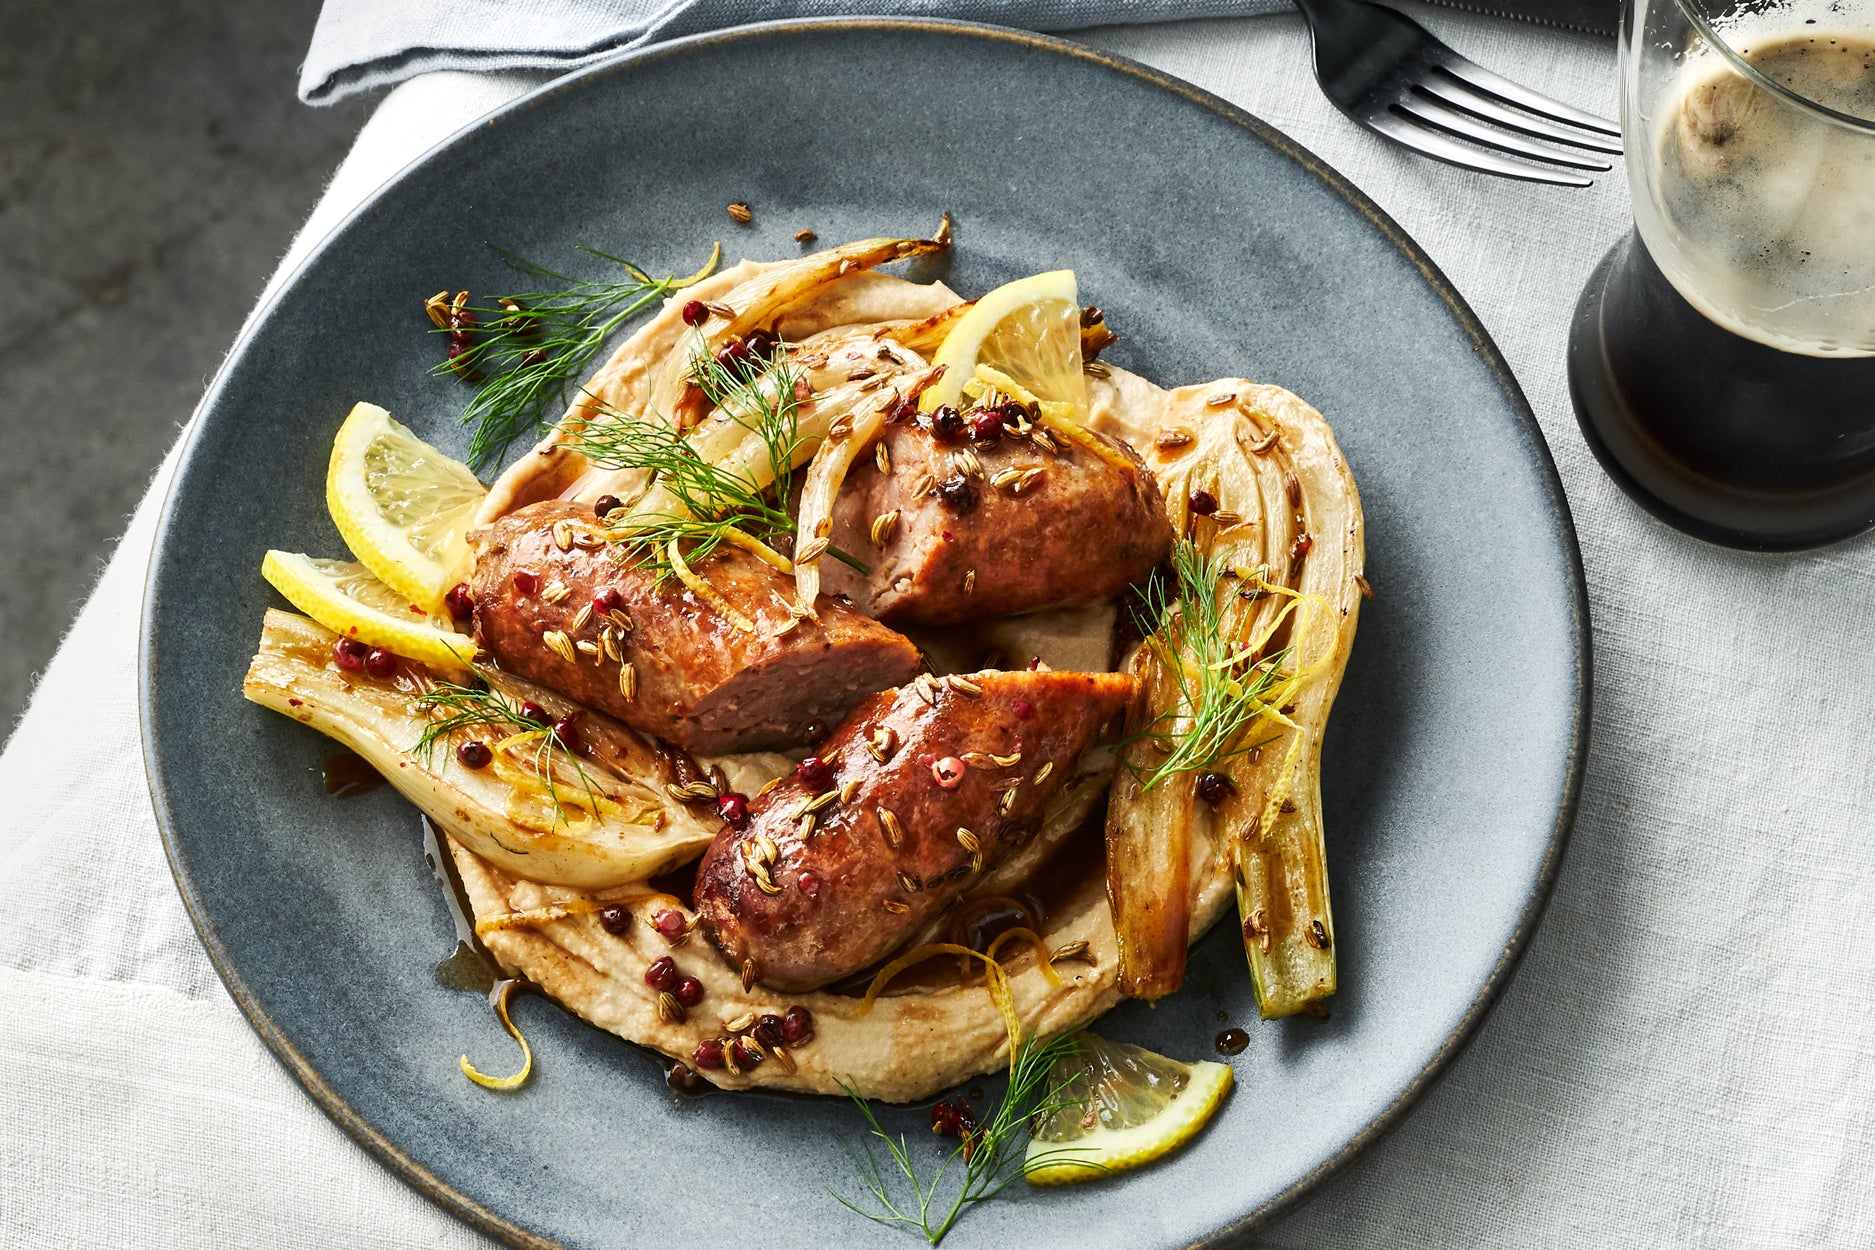 Braised Sausage and Fennel with Toasted Spices